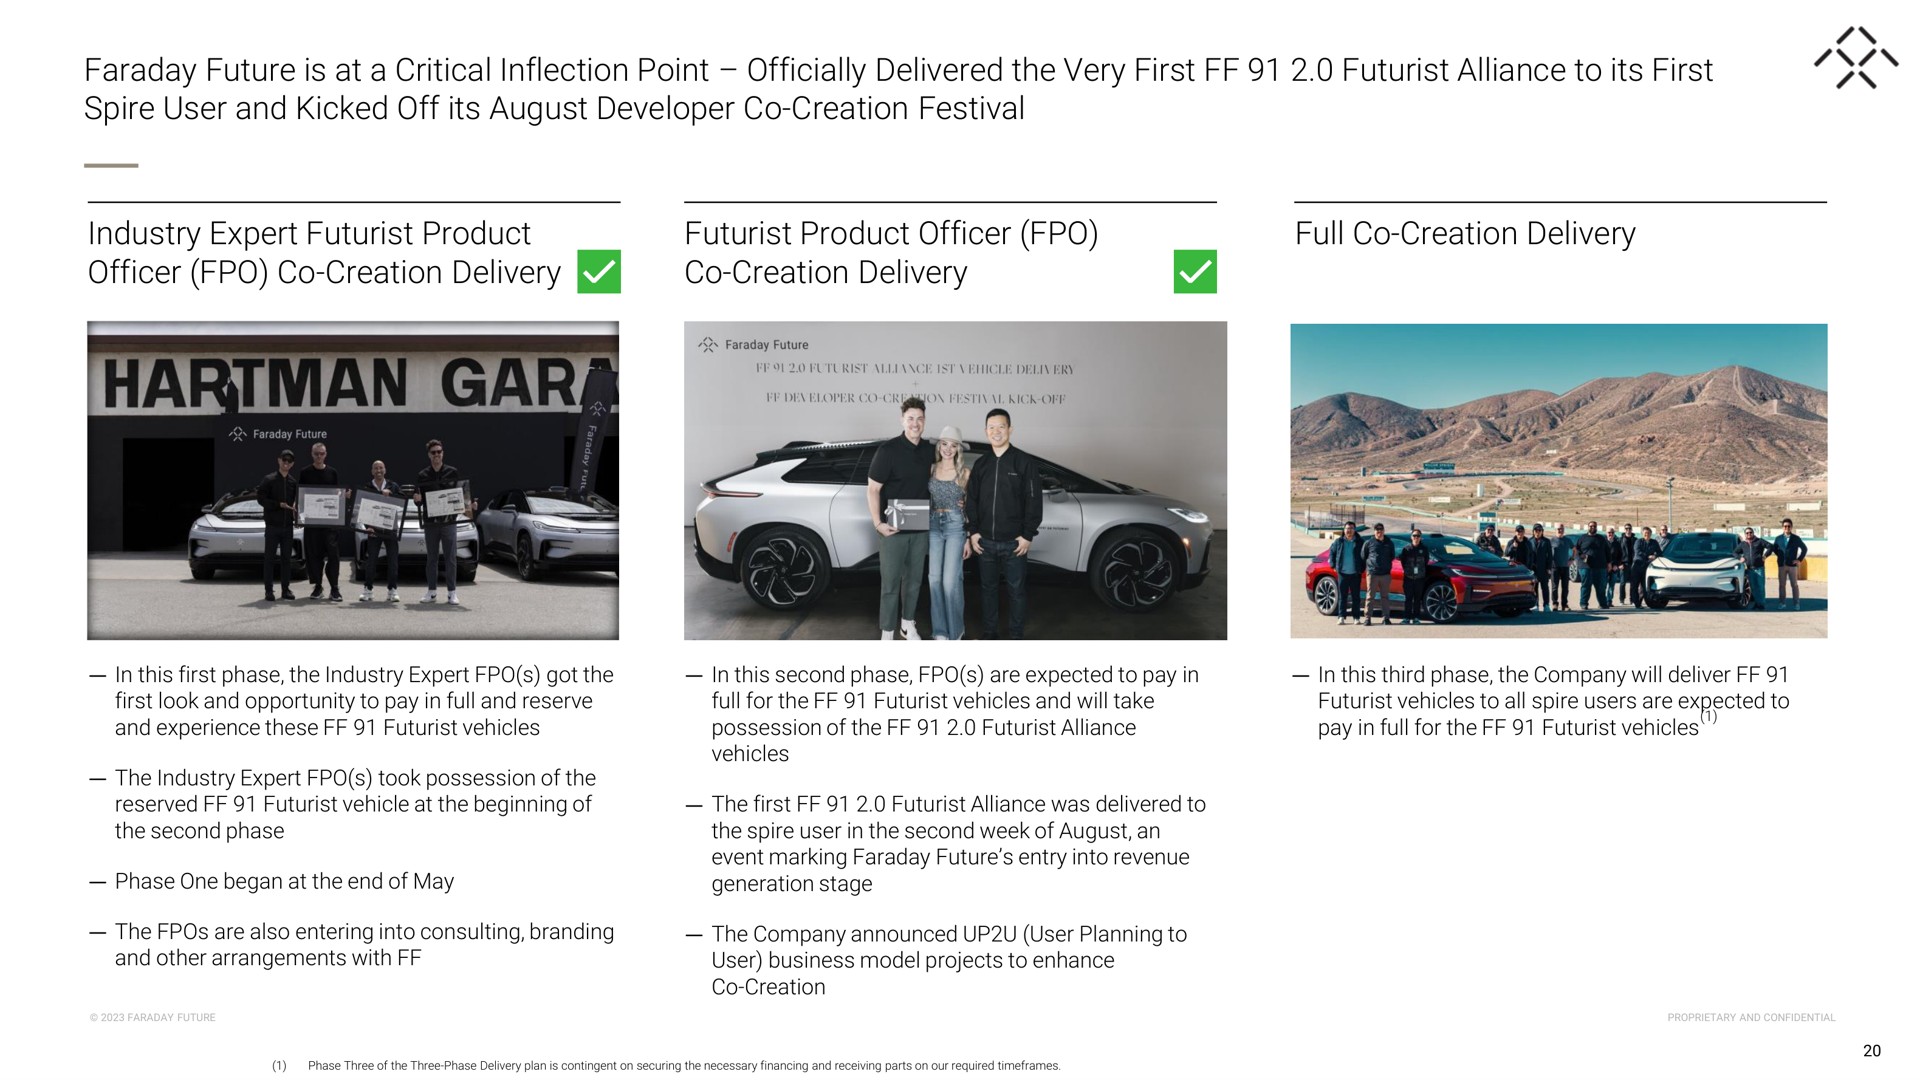 faraday future is at a critical inflection point officially delivered the very first futurist alliance to its first spire user and kicked off its august developer creation festival industry expert futurist product officer creation delivery futurist product officer creation delivery full creation delivery | Faraday Future